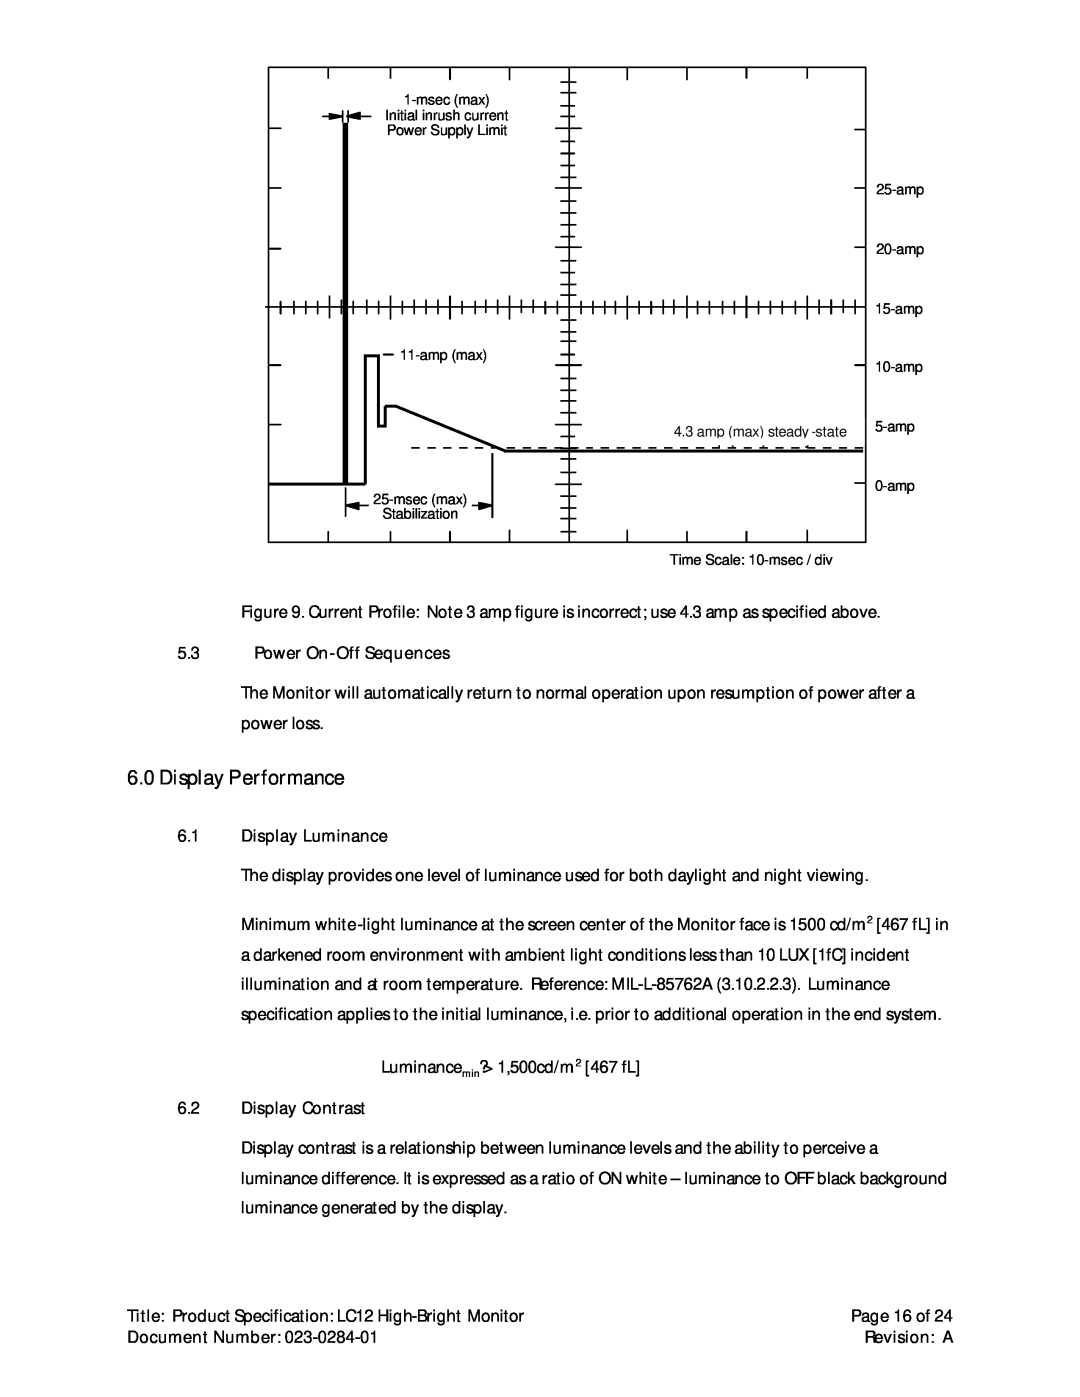 Planar LC12 manual Display Performance, Page 16 of 